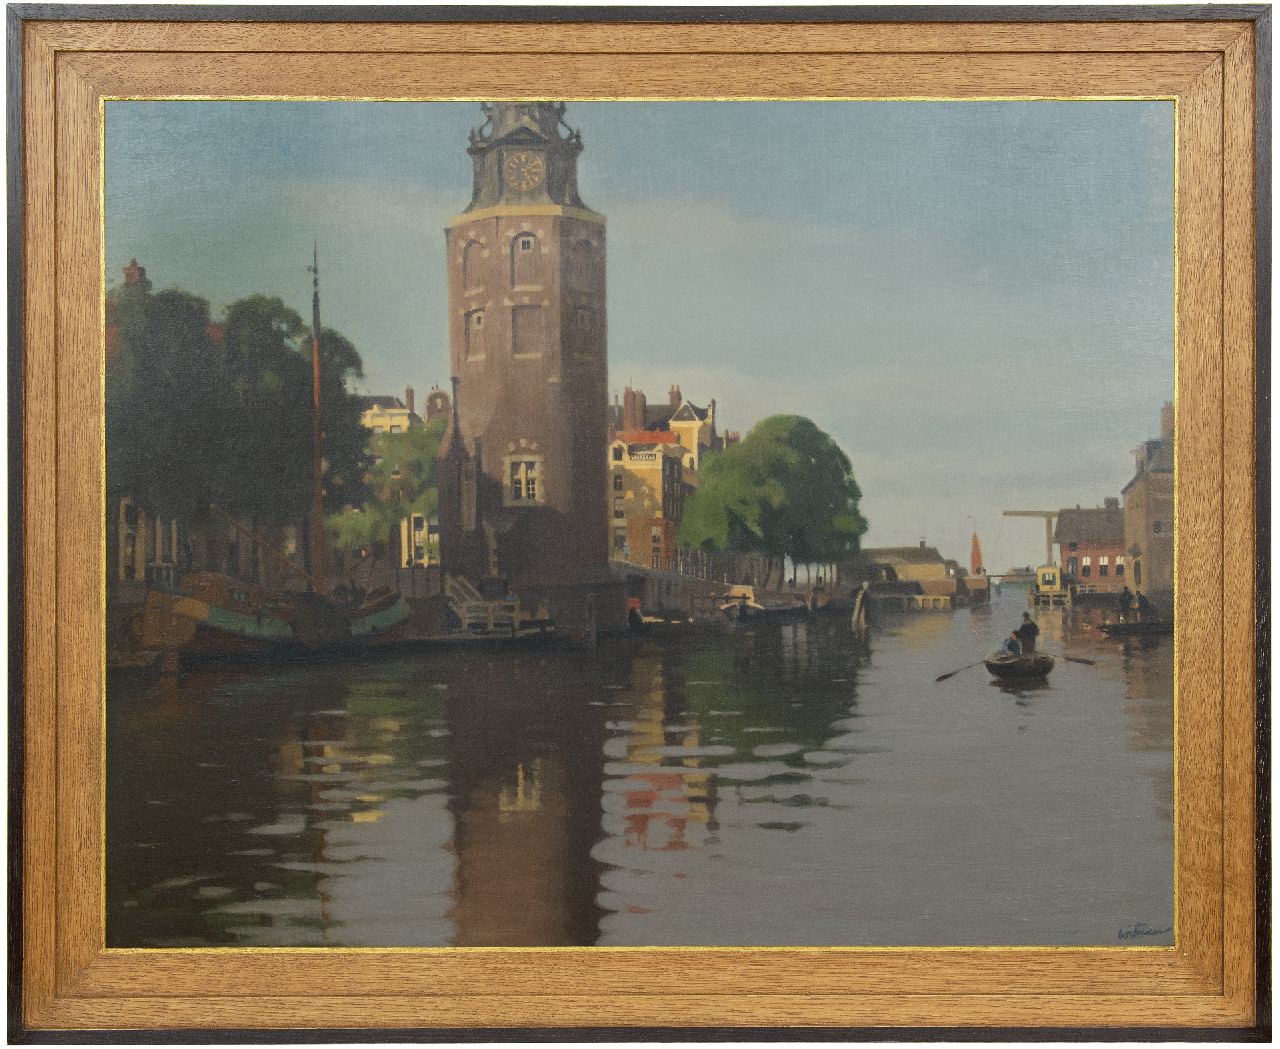 Witsen W.A.  | 'Willem' Arnold Witsen | Paintings offered for sale | The Montelbaanstoren on the Oude Schans in summer, oil on canvas 79.7 x 100.6 cm, signed l.r. and painted ca. 1913